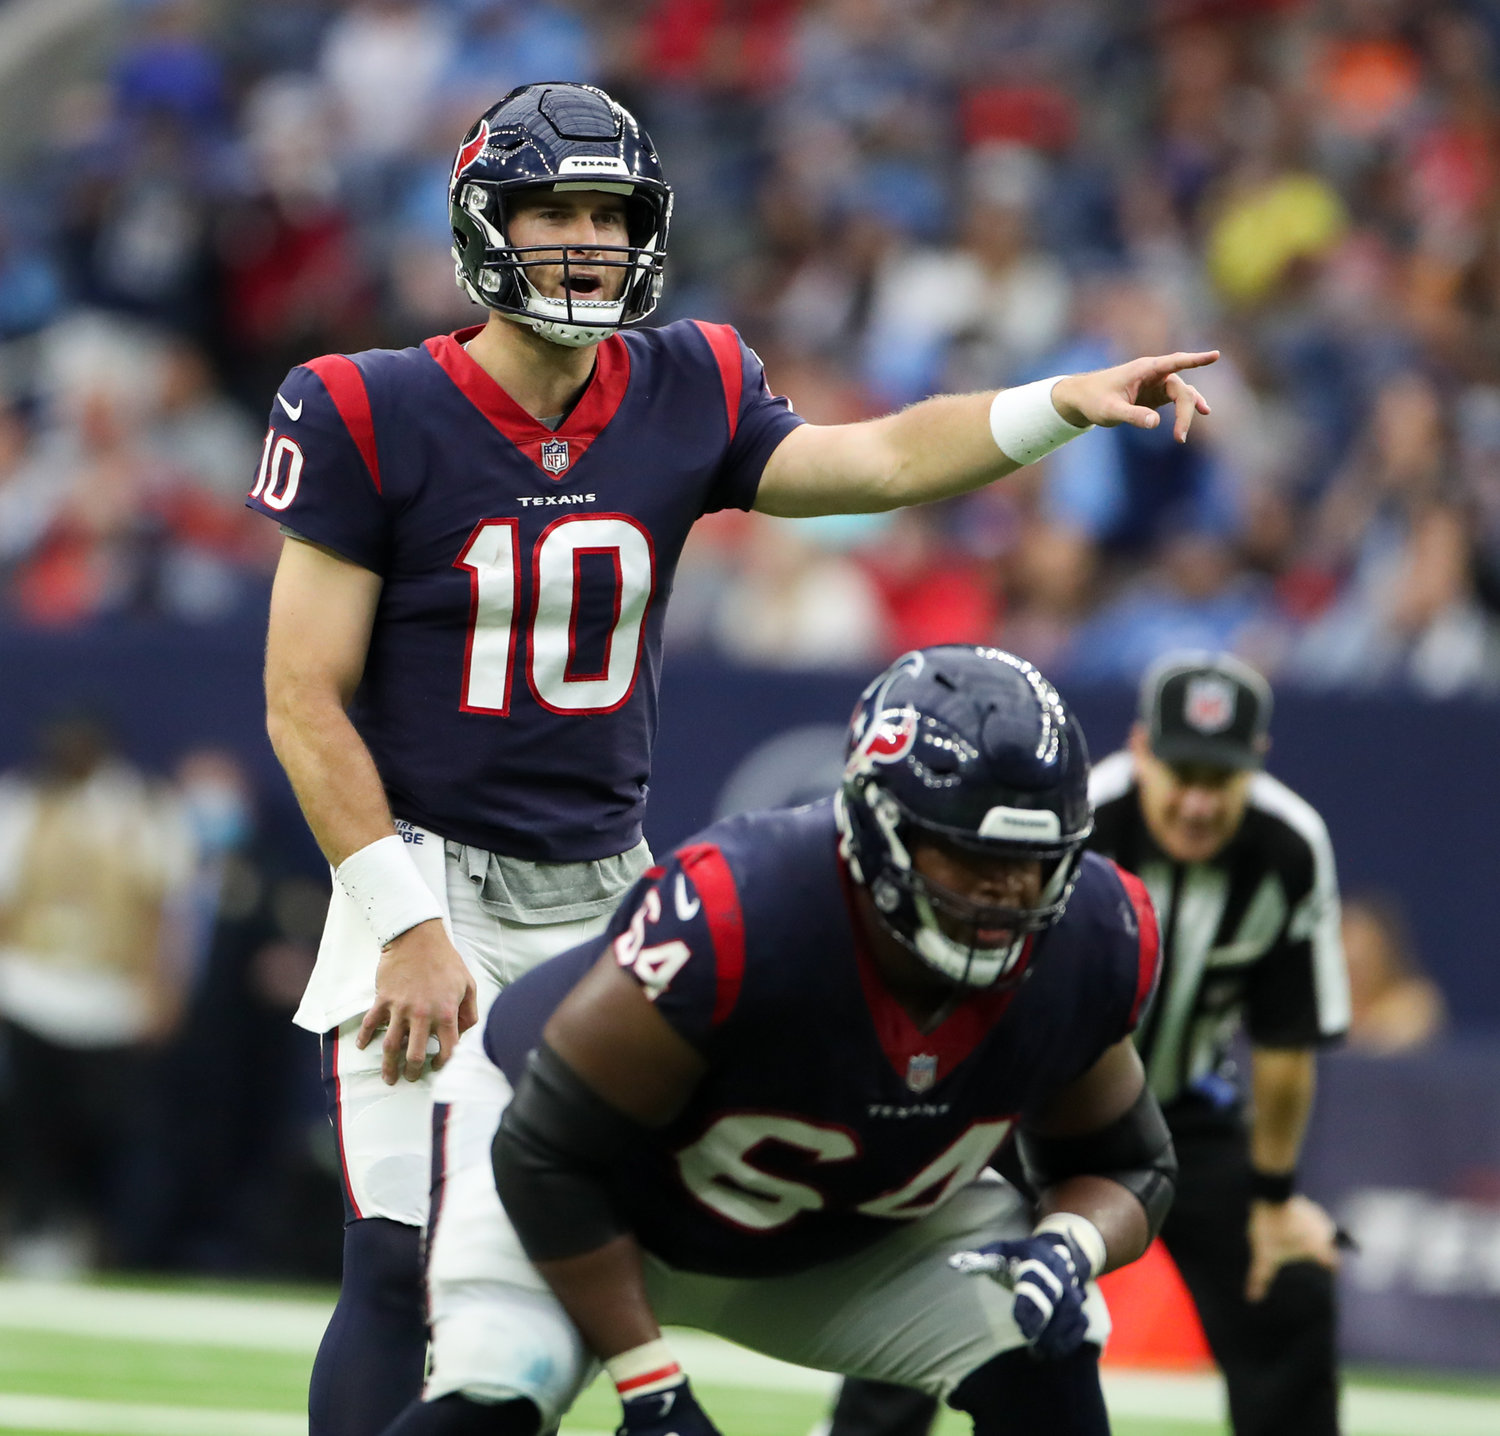 Houston Texans quarterback Davis Mills (10) during an NFL game between the Texans and the Titans on Jan. 9, 2022 in Houston, Texas. The Titans won, 28-25.